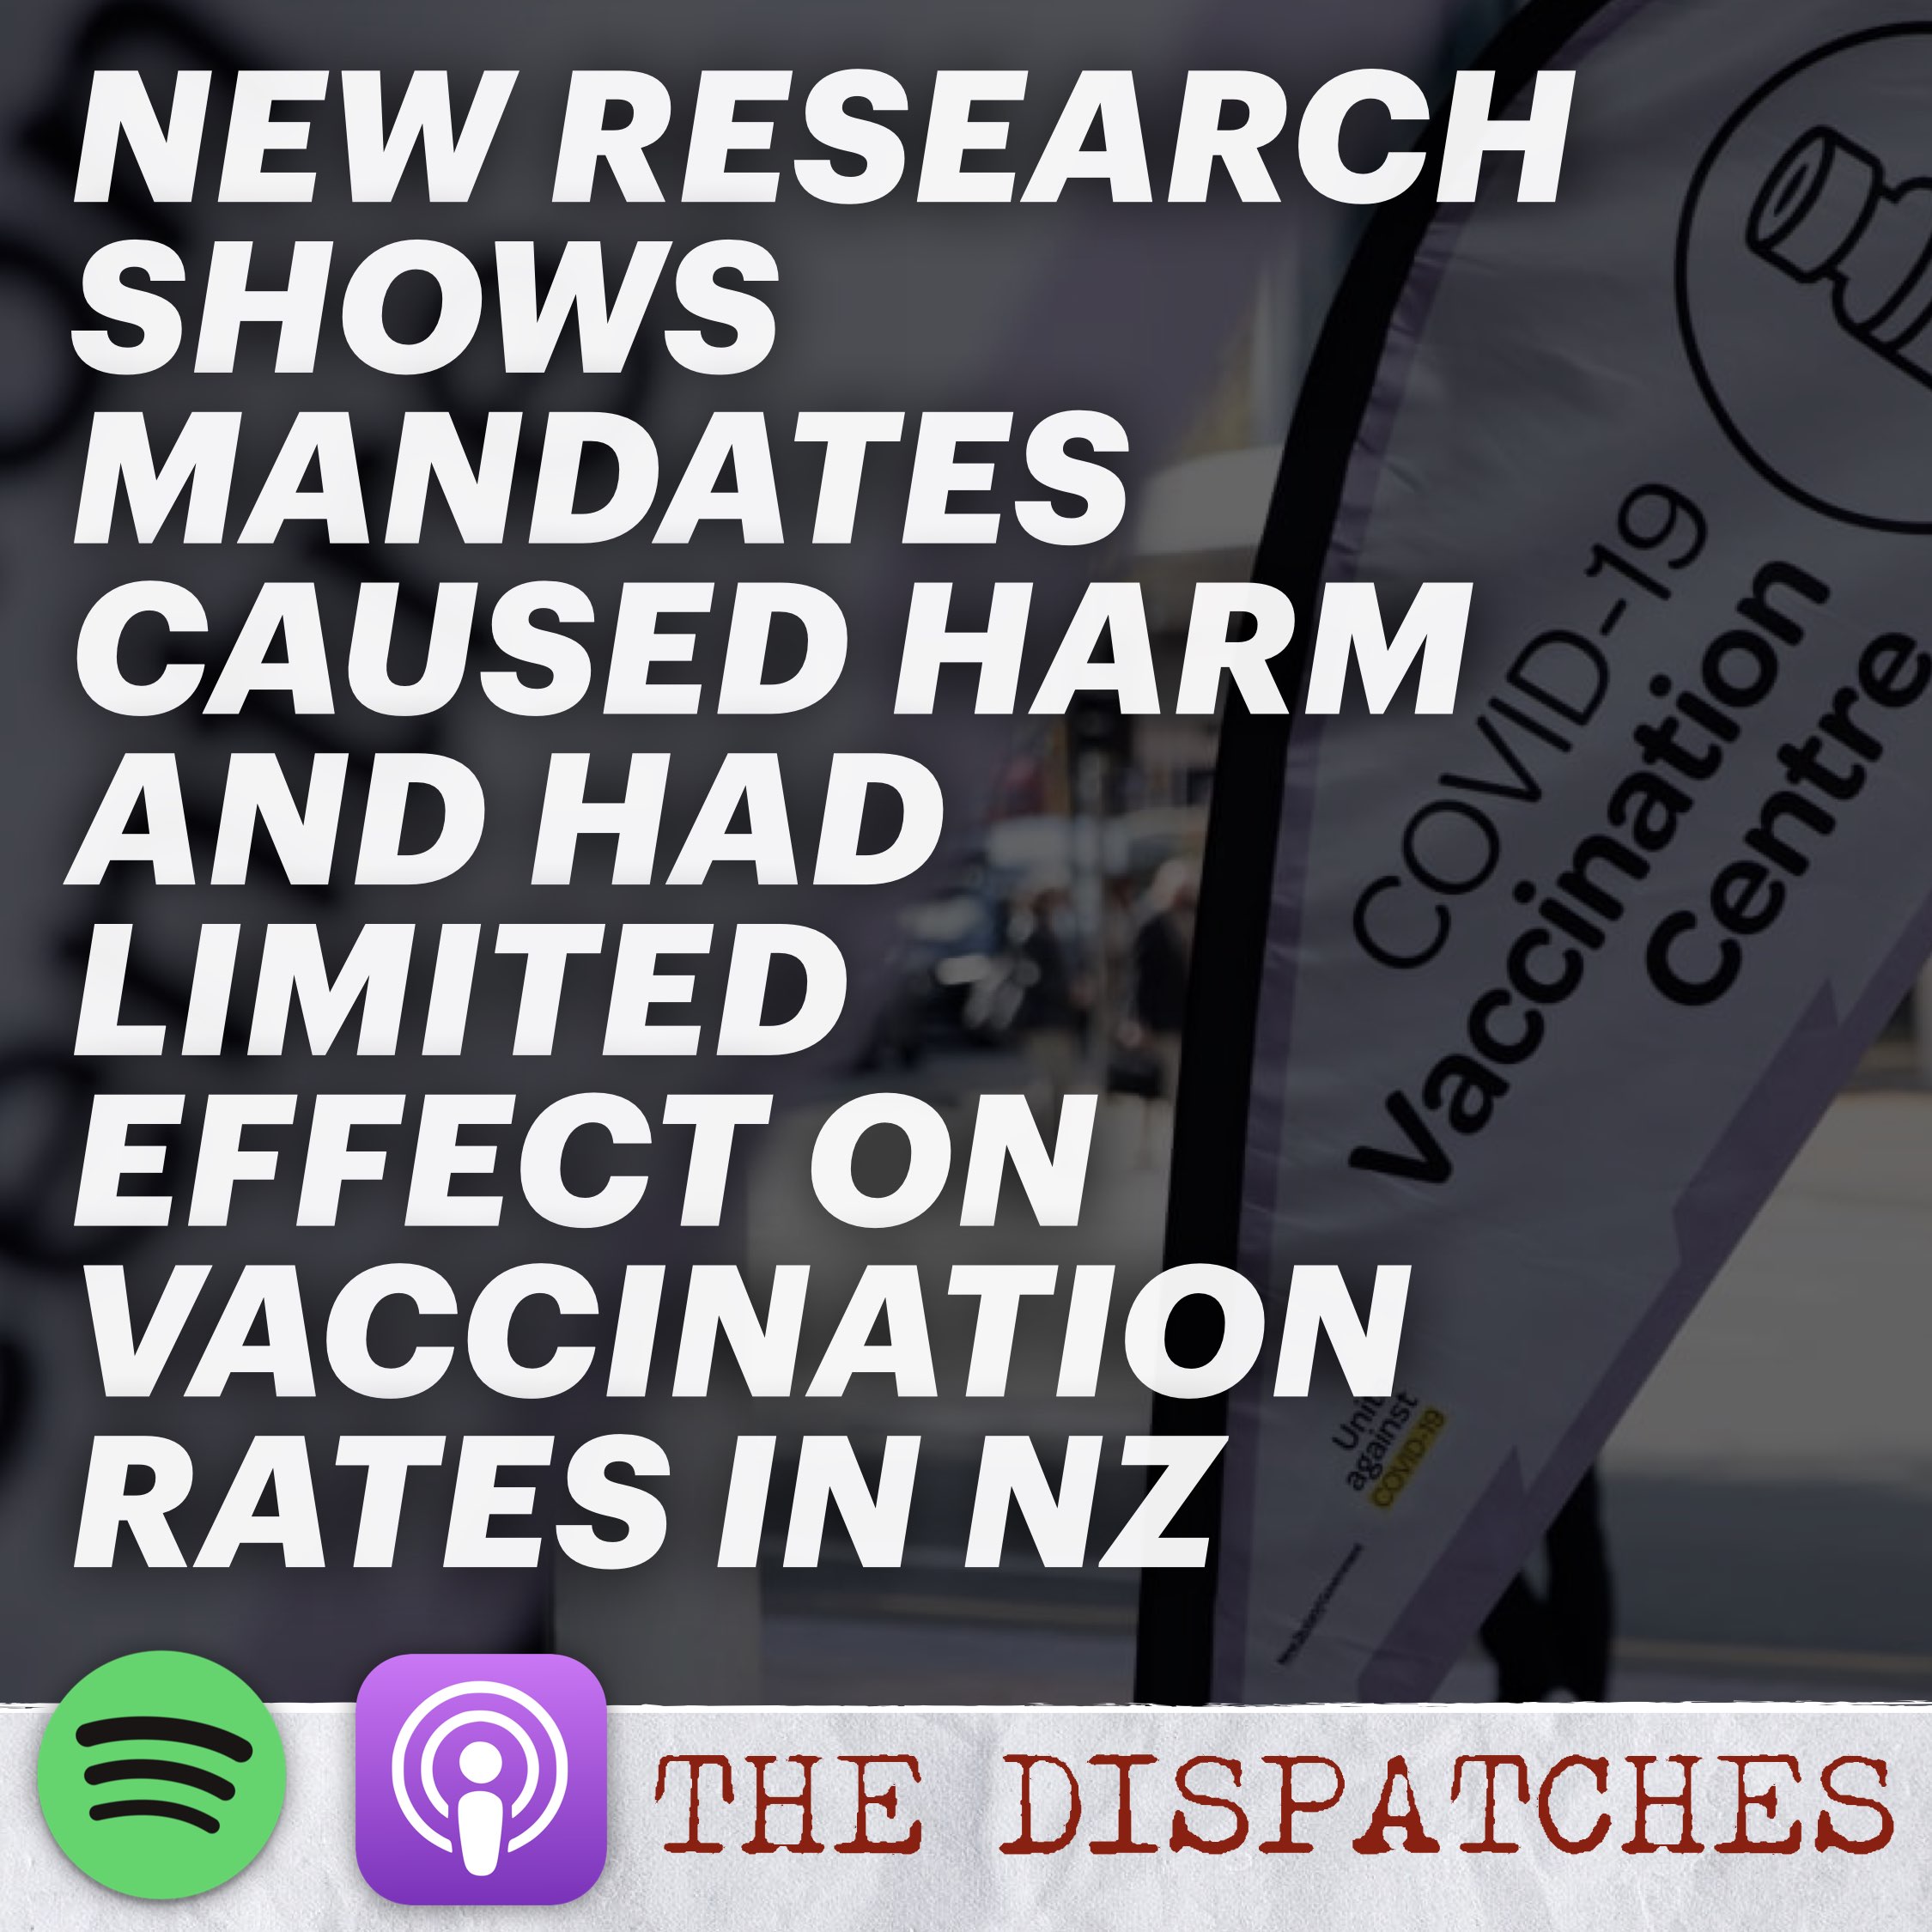 New Research Shows NZ Mandates Caused Harm And Had Limited Effect on Vaccination Rates